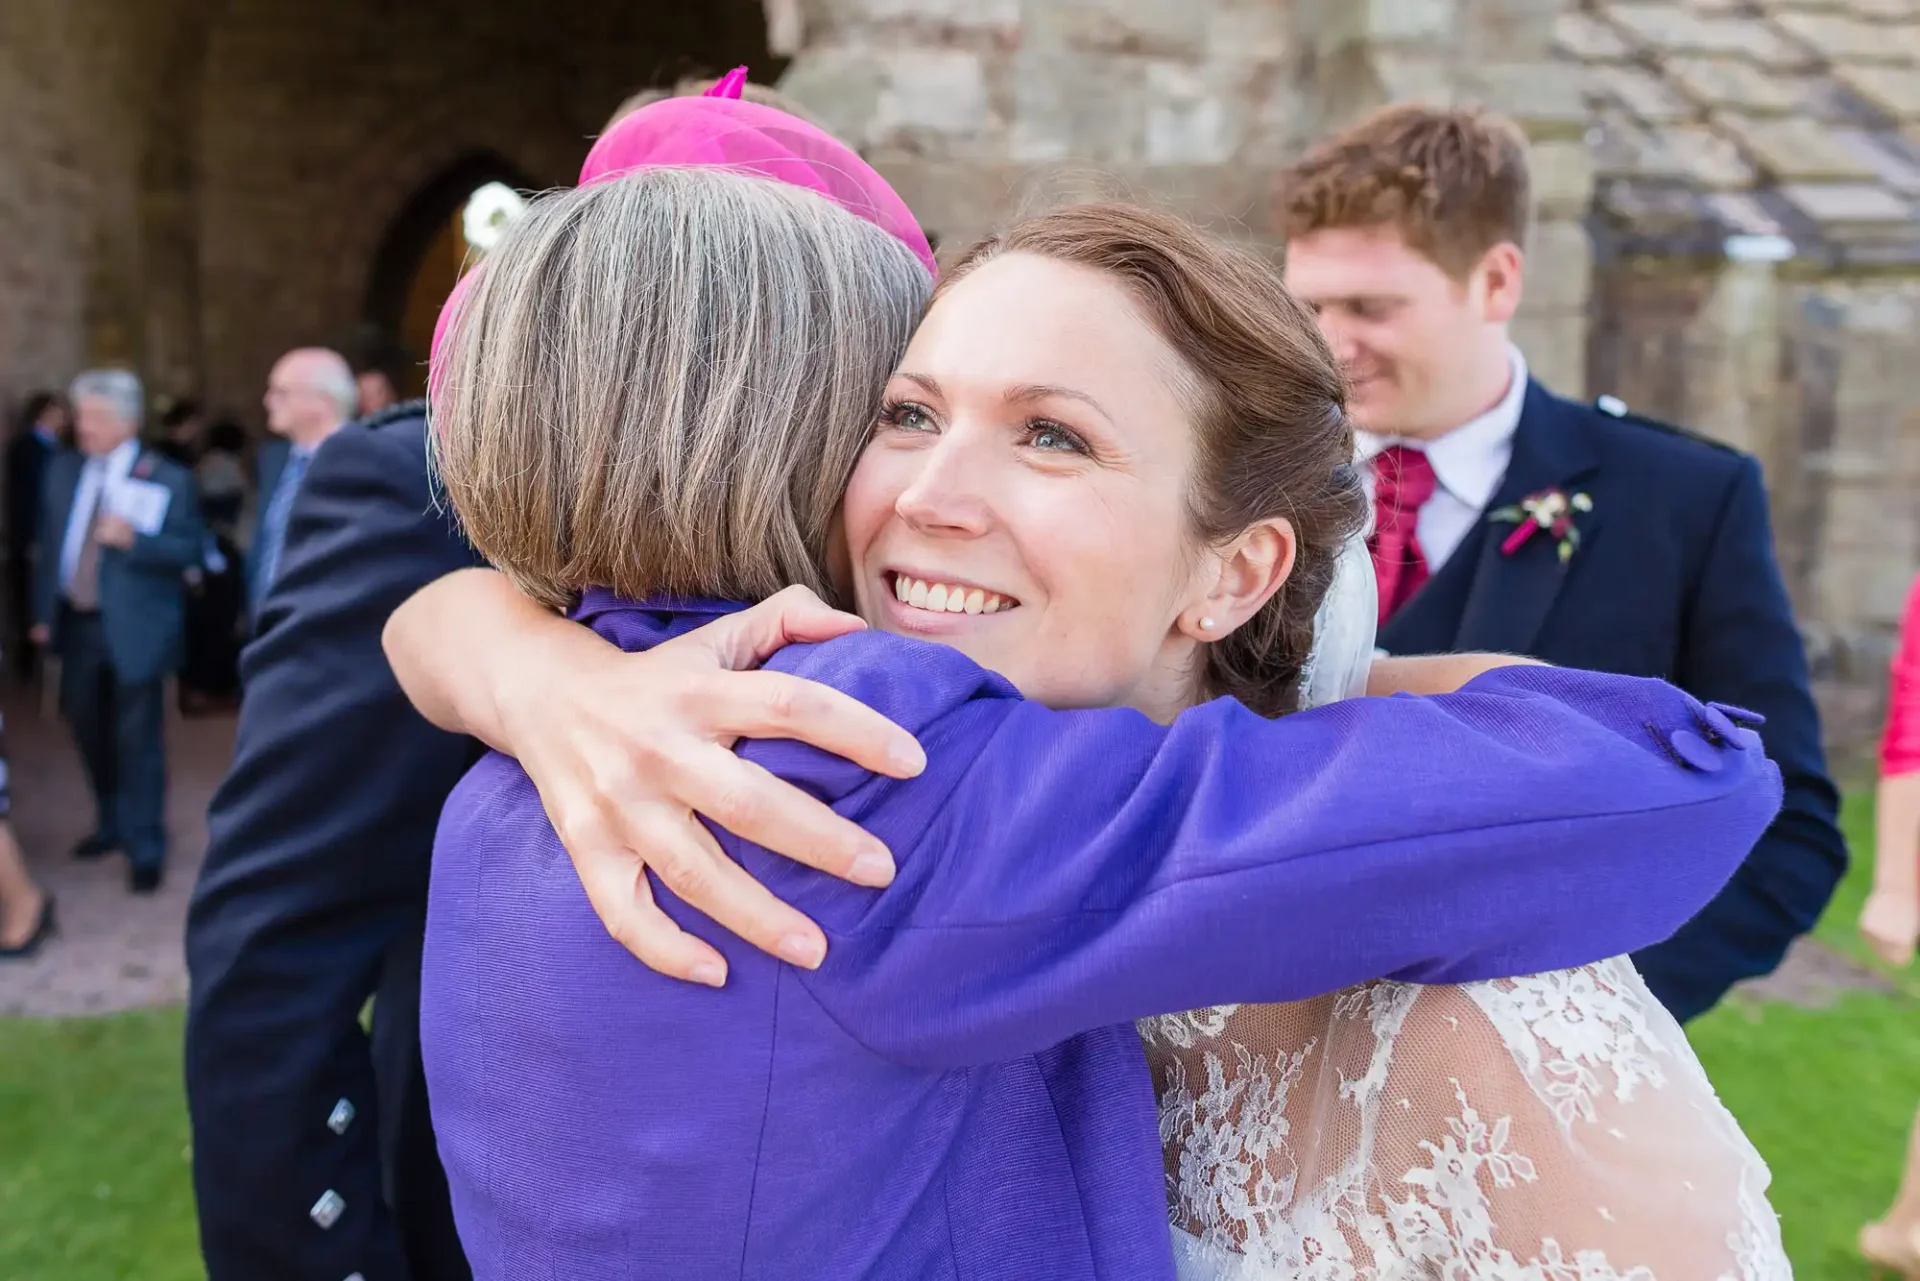 A bride in a lace dress joyfully hugs an older woman in a purple jacket at a wedding, with guests and a stone building in the background.